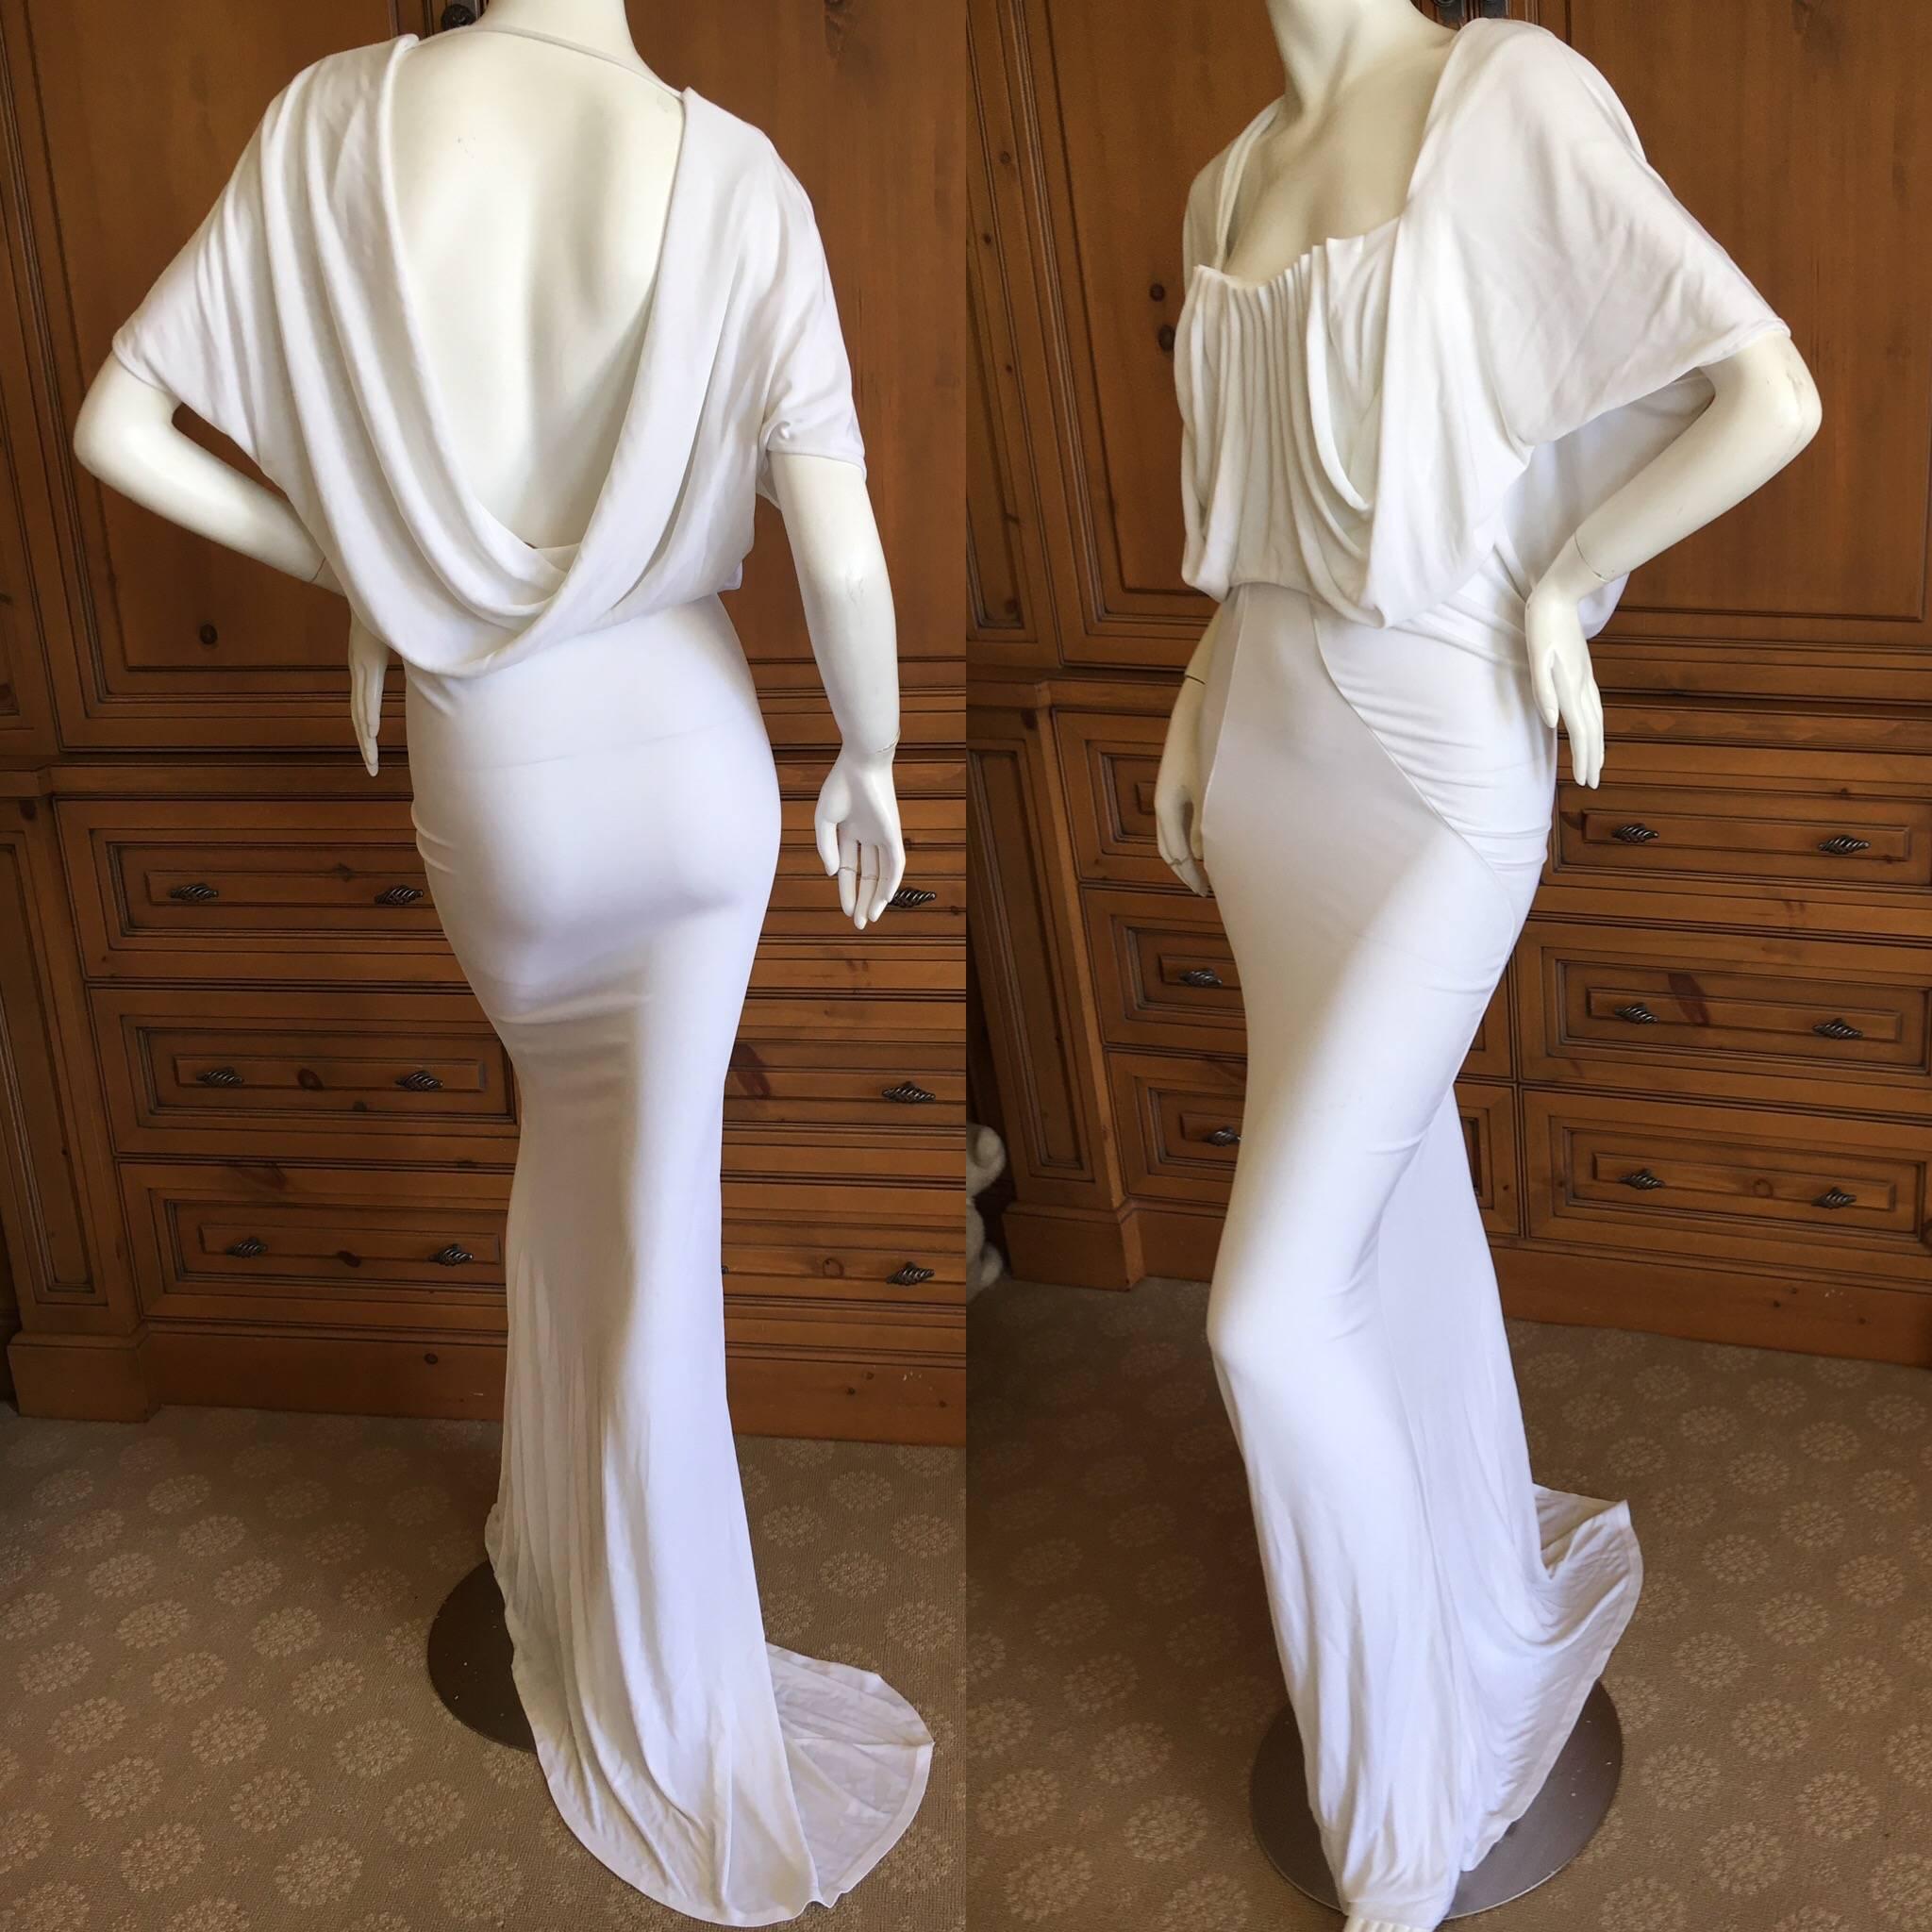 John Galliano Vintage Draped Back White Goddess Gown with Train .
This would Make a Sweet Wedding Dress.
Accordion pleating at the bust, with an elegant draped back, slight train.
Size Small

 Bust 36" 
Waist 25"
 Hips 38"
 Length